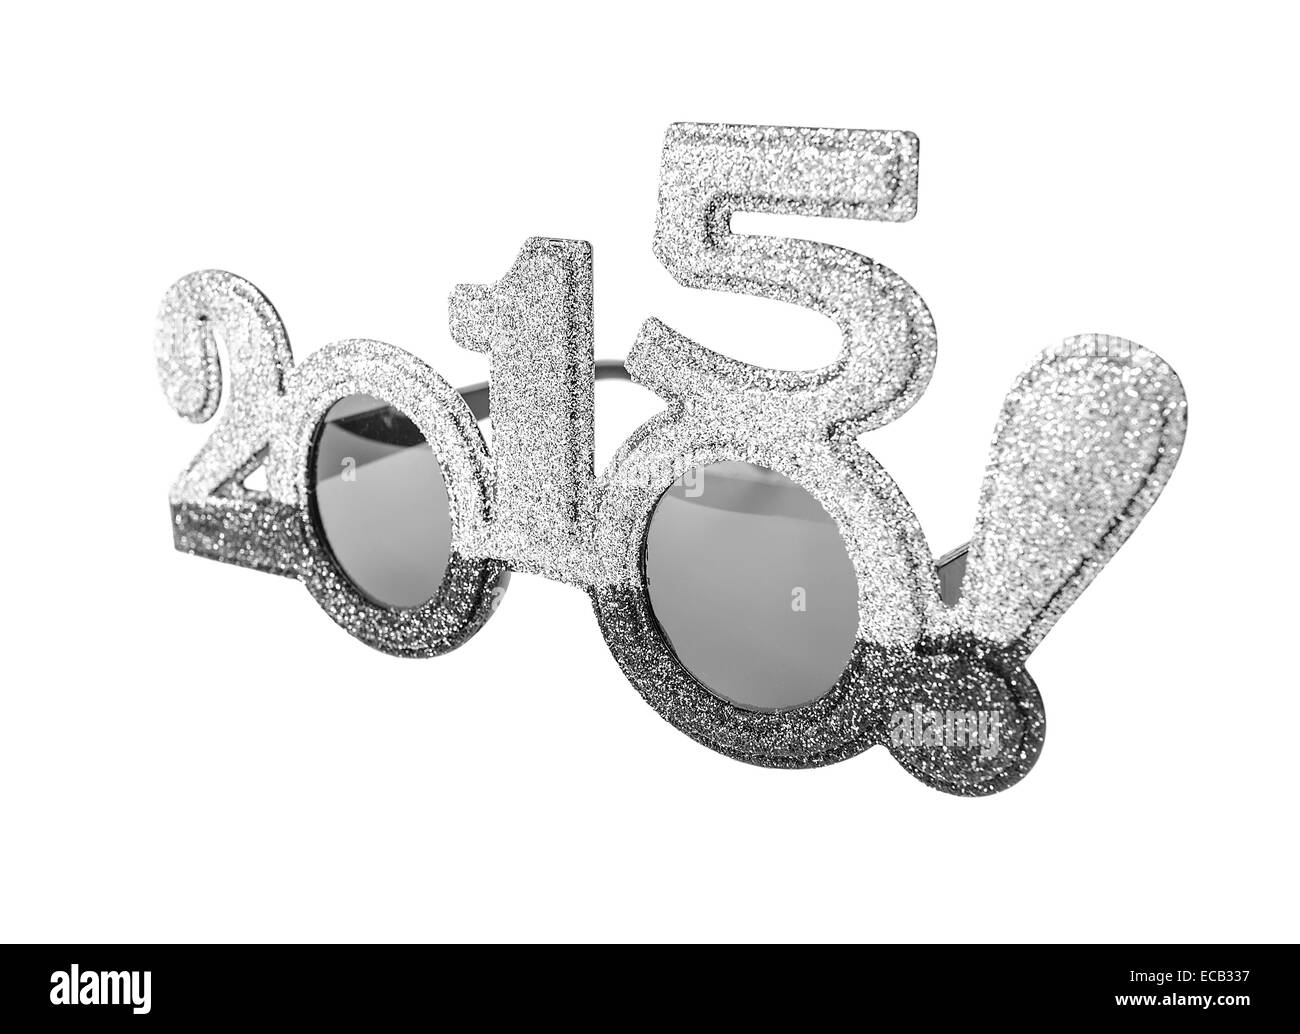 Happy New 2015 year in silver tones. Christmas figures in the form of glasses. Stock Photo